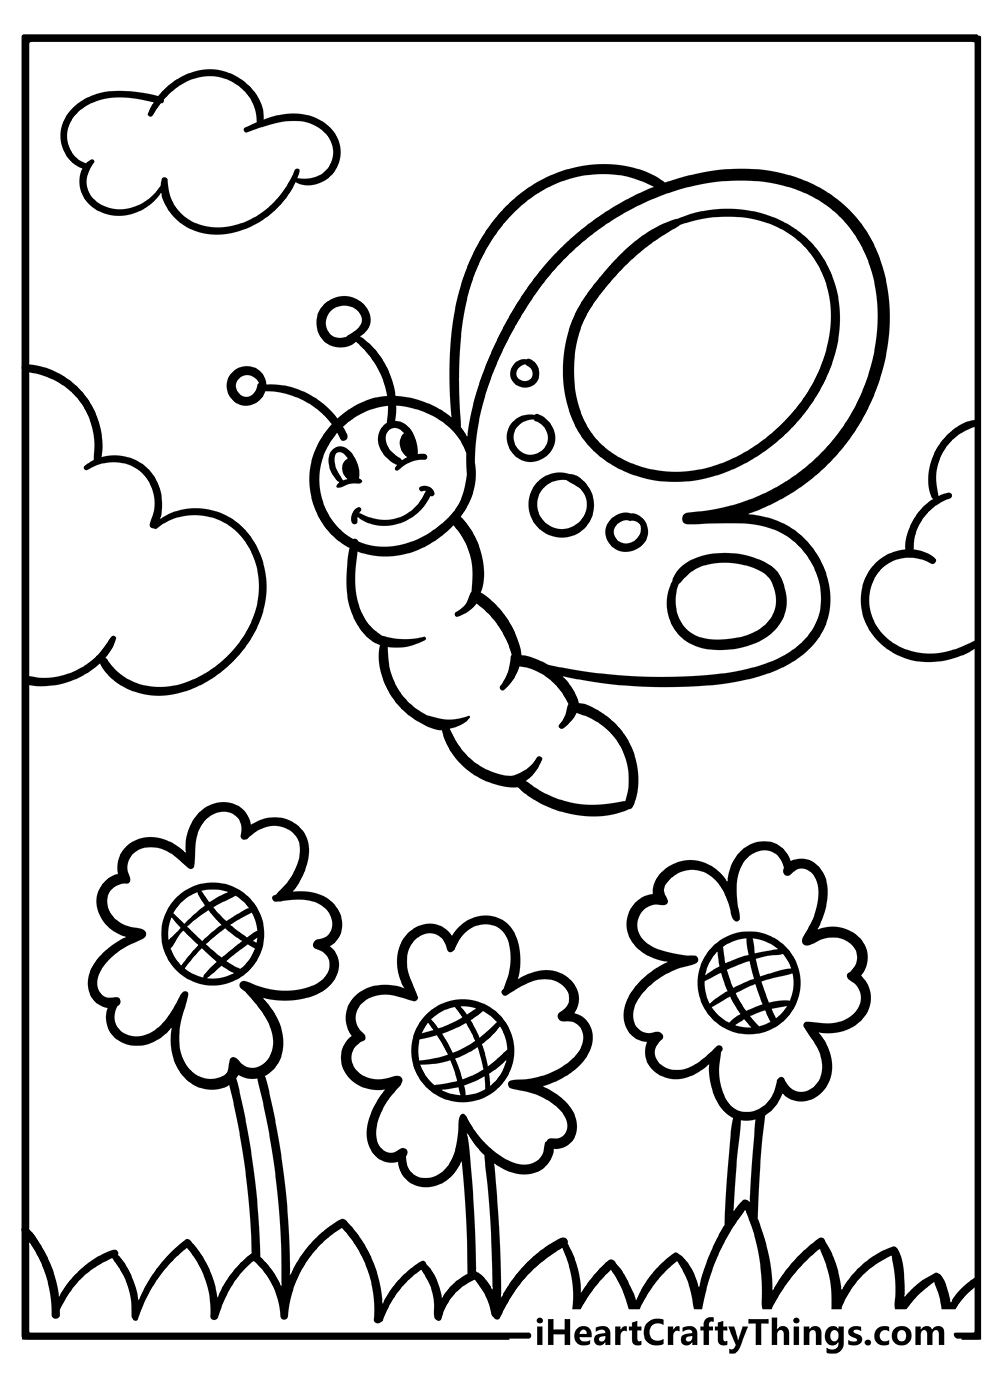 Kindergarten Coloring Pages for kids free download